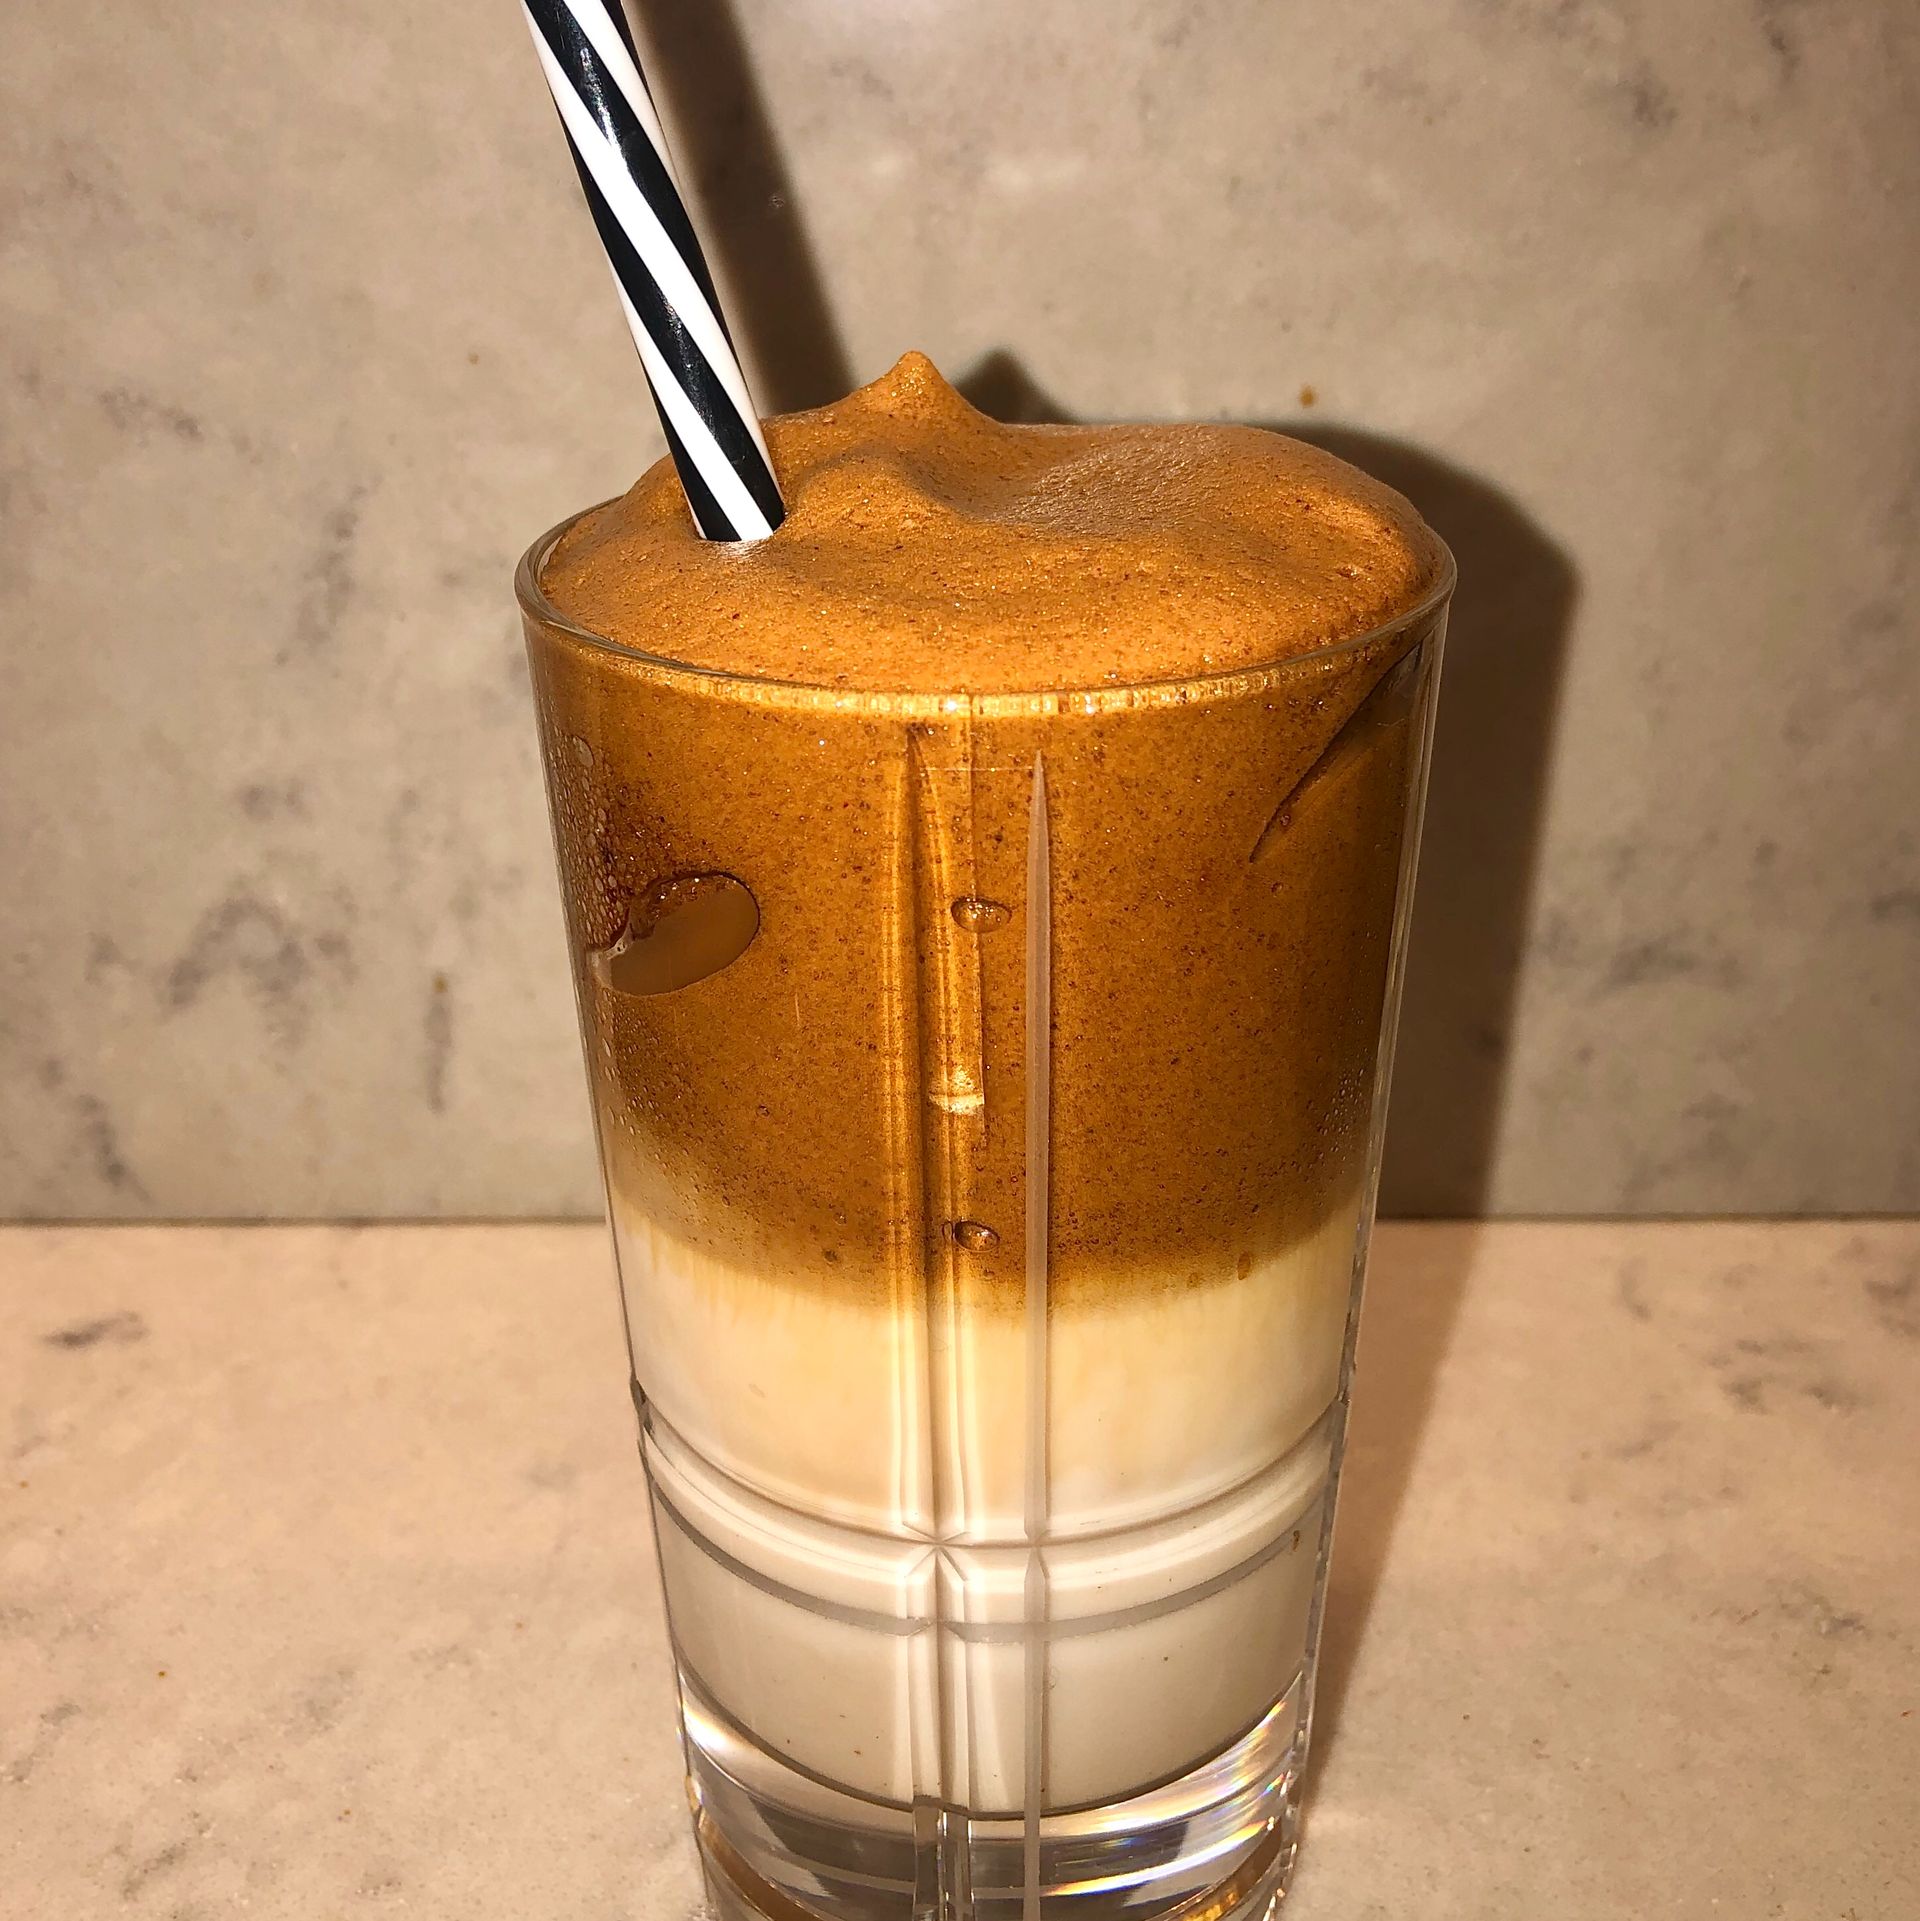 whipped coffee / frappé coffee